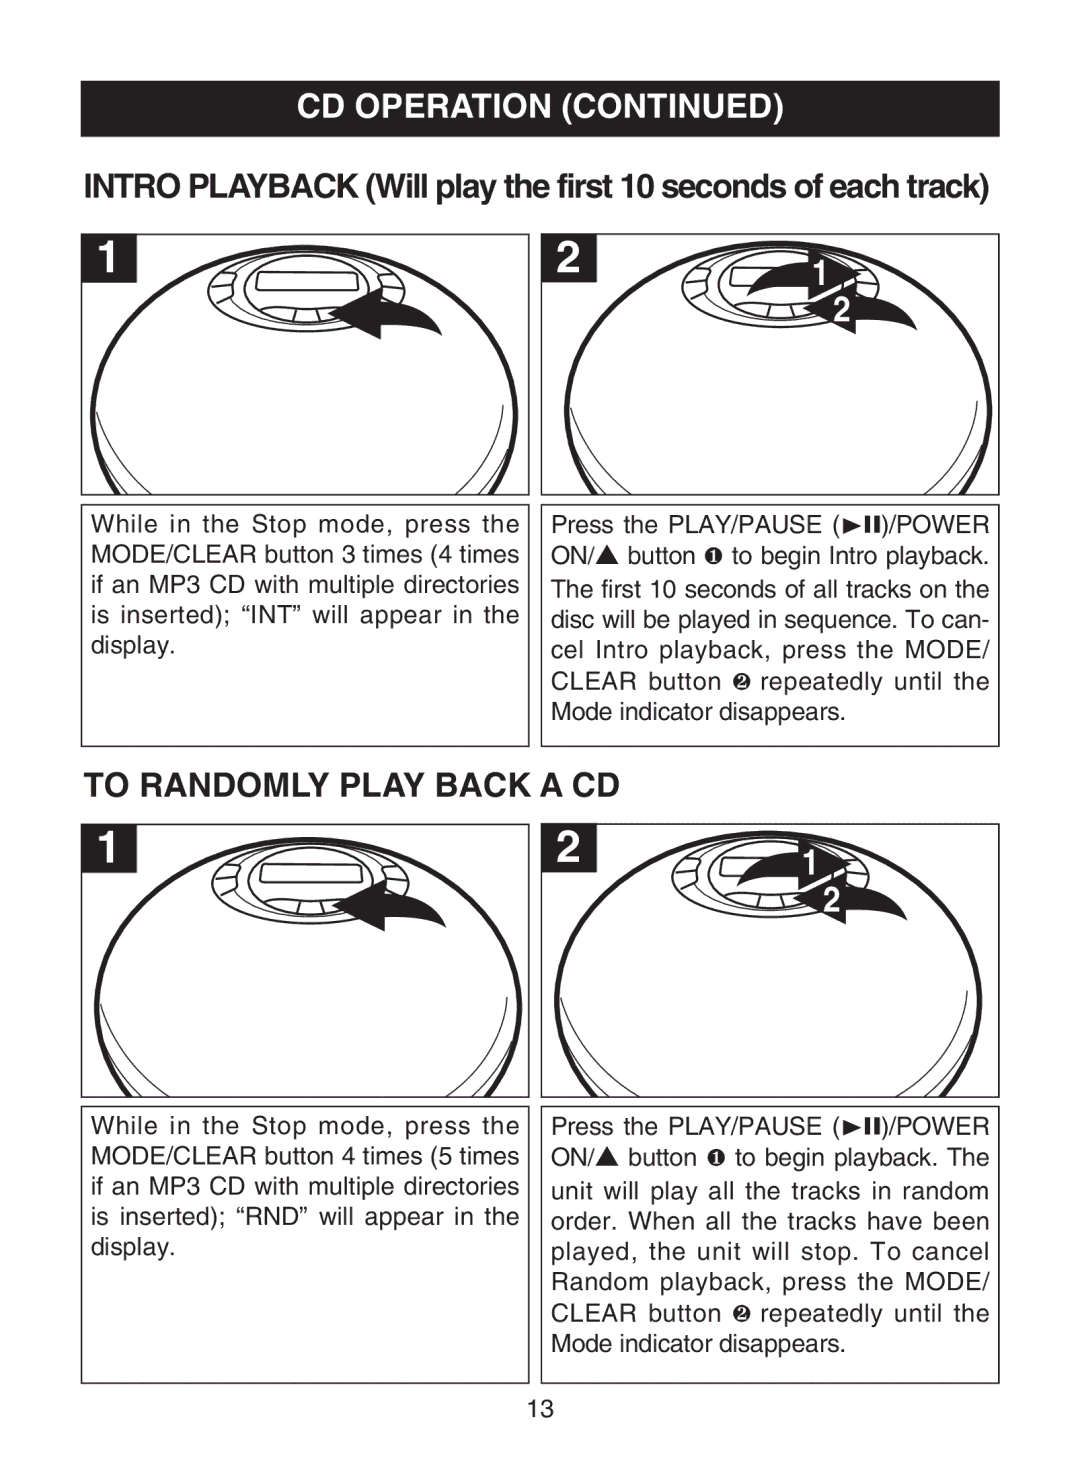 Memorex MPD8812 manual To Randomly Play Back a CD, Intro Playback Will play the first 10 seconds of each track 